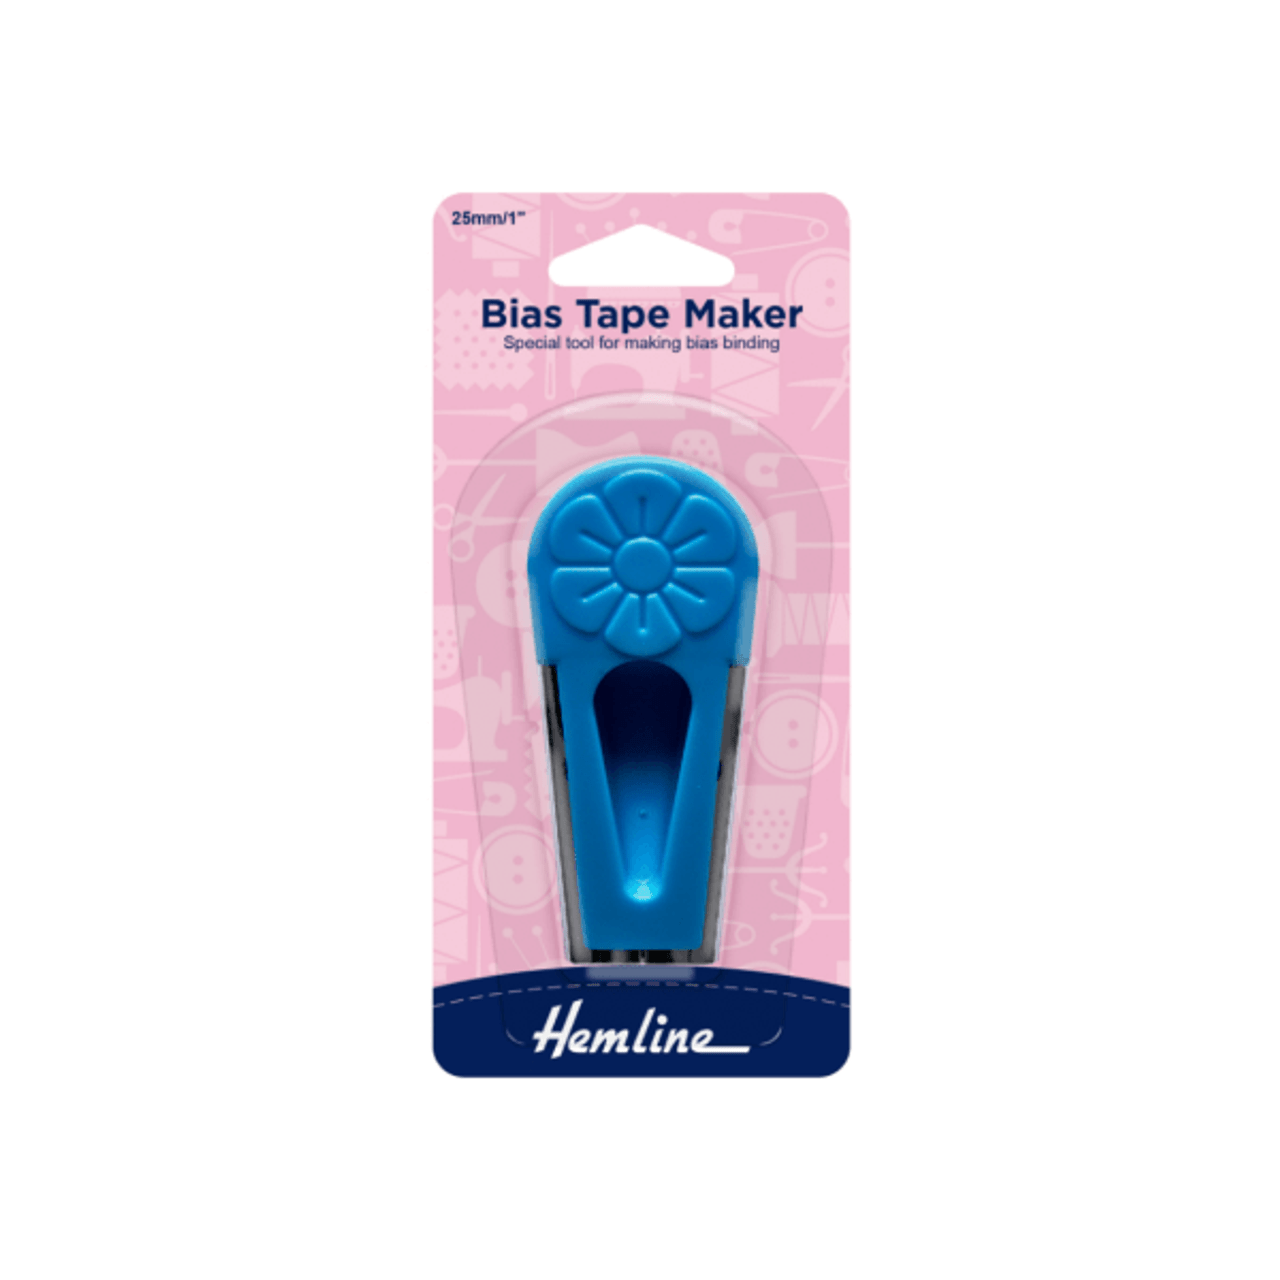 Simplify Your Sewing Process with Precision Bias Tape and Bindings: Hemline Binding and Bias Tape Maker - 25mm / 1"